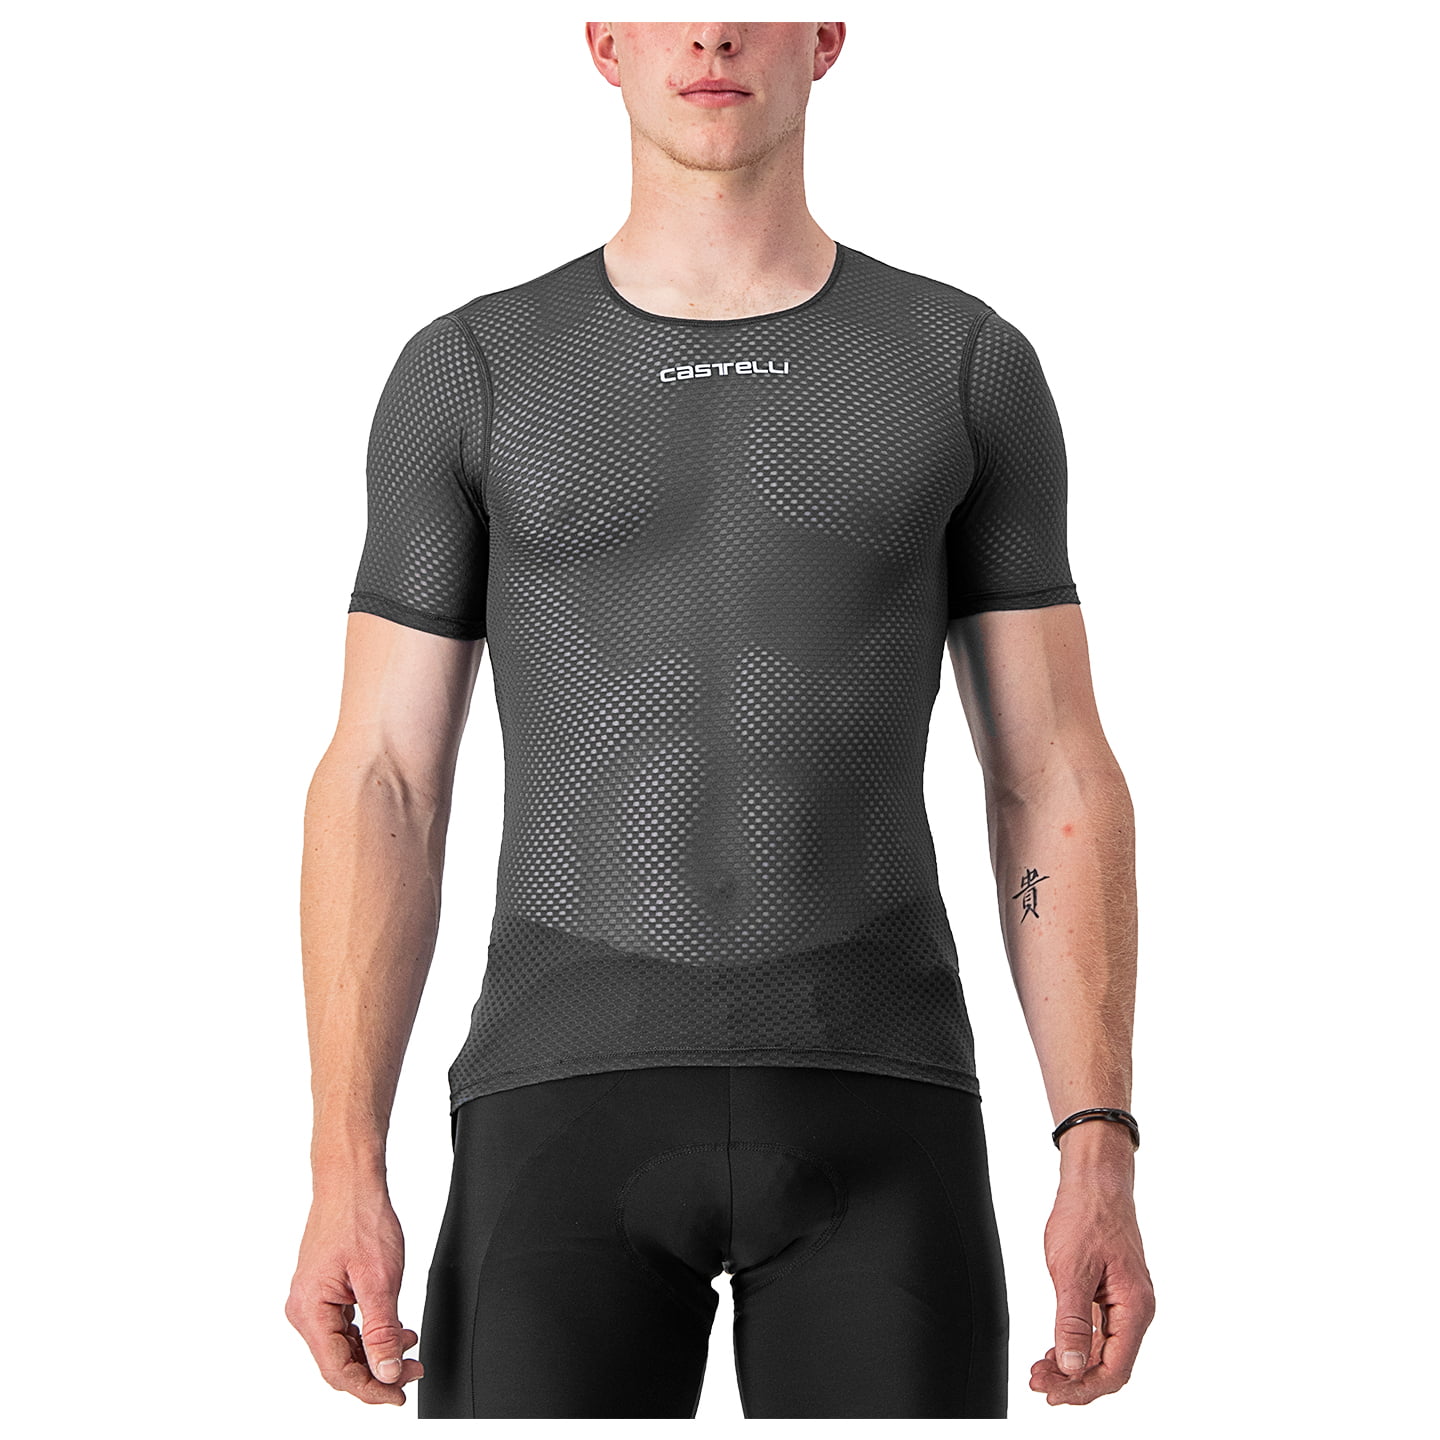 CASTELLI Pro Mesh 2.0 Cycling Base Layer Base Layer, for men, size XL, Singlet, Cycling clothing